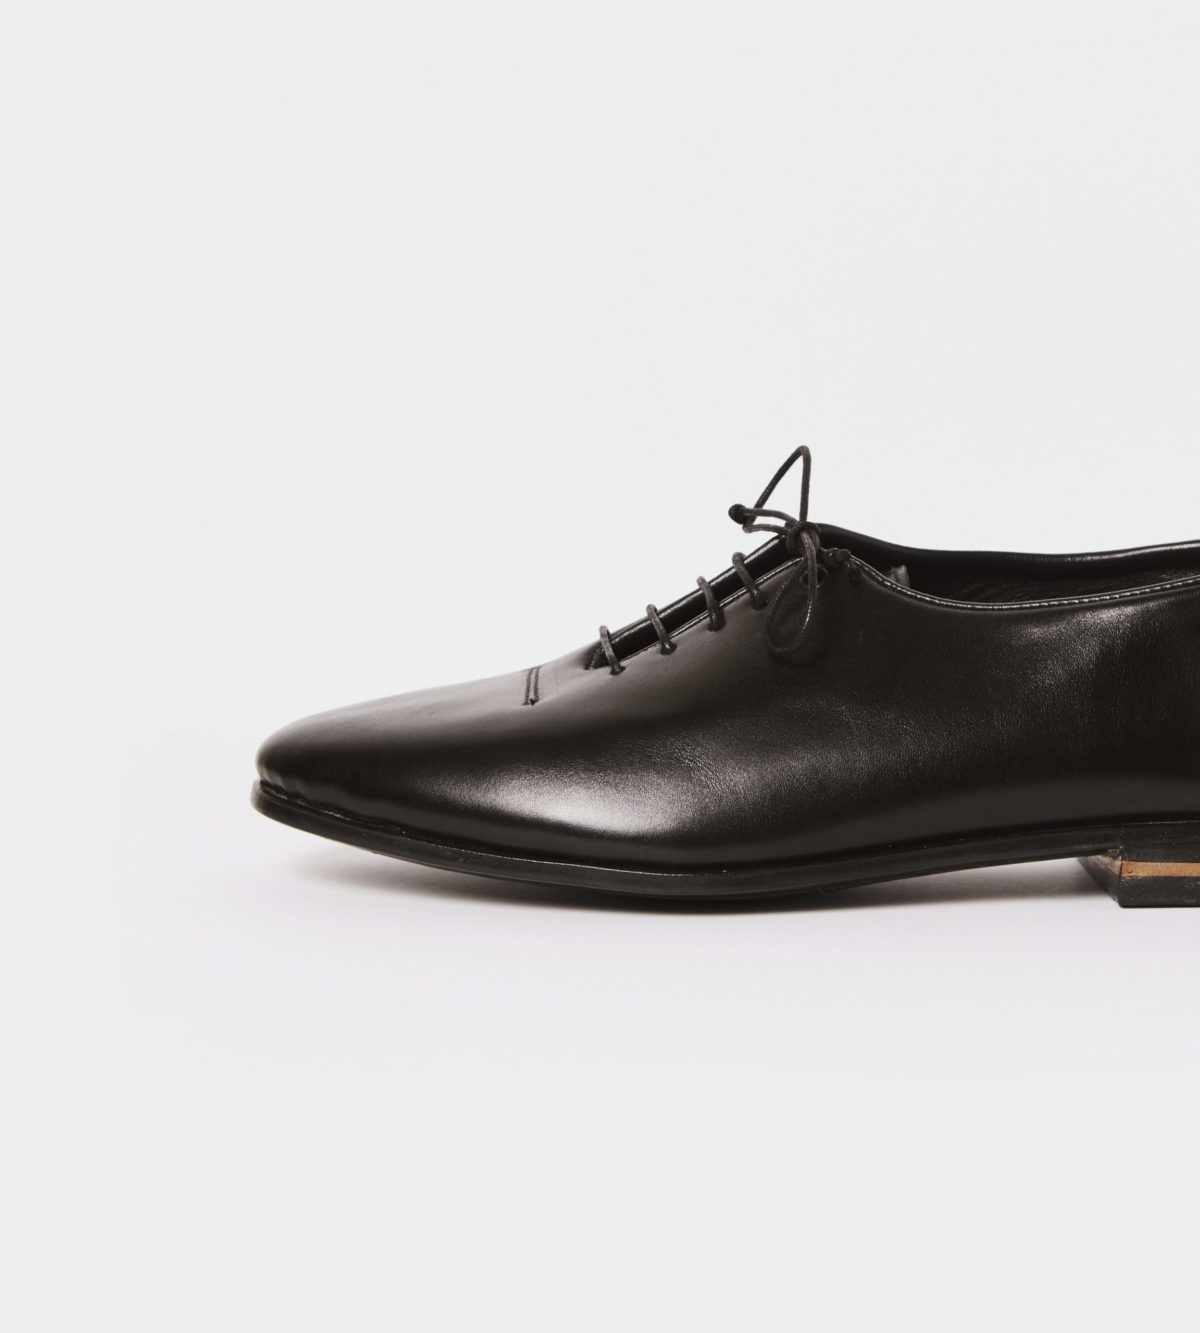 Soft wholecut leather shoes in black leather - detail